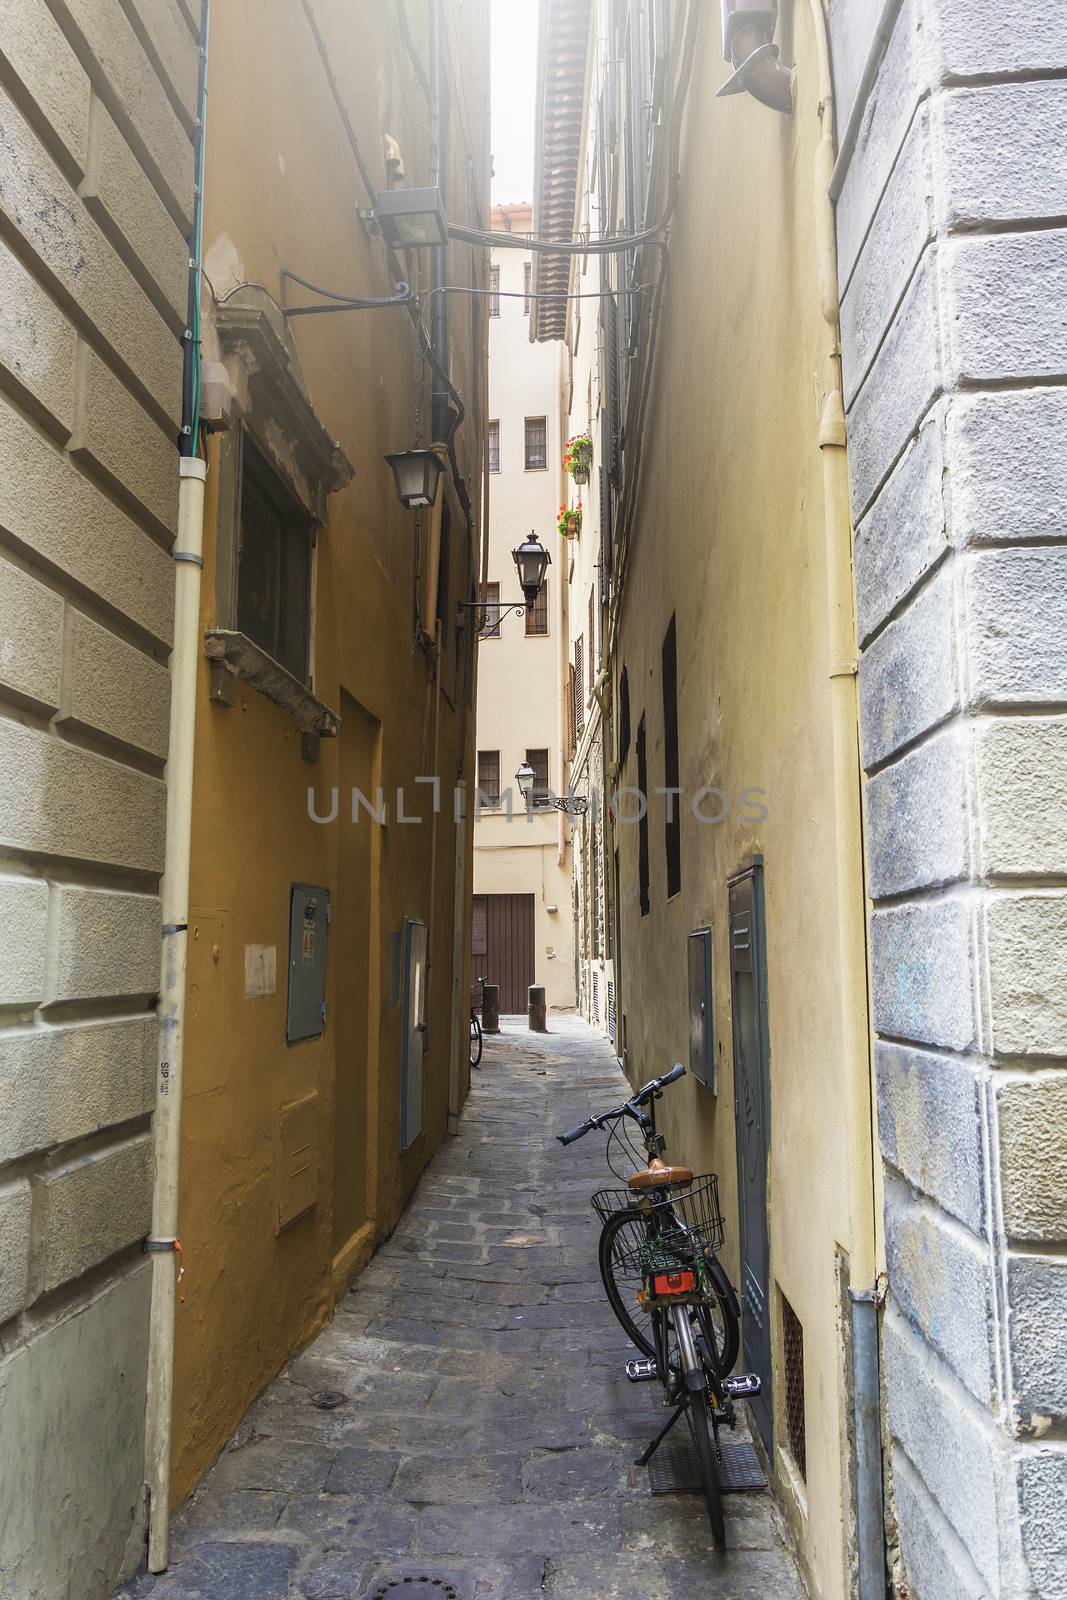 view of a bicycle leaned on a wall of a narrow alley in Florence, Italy